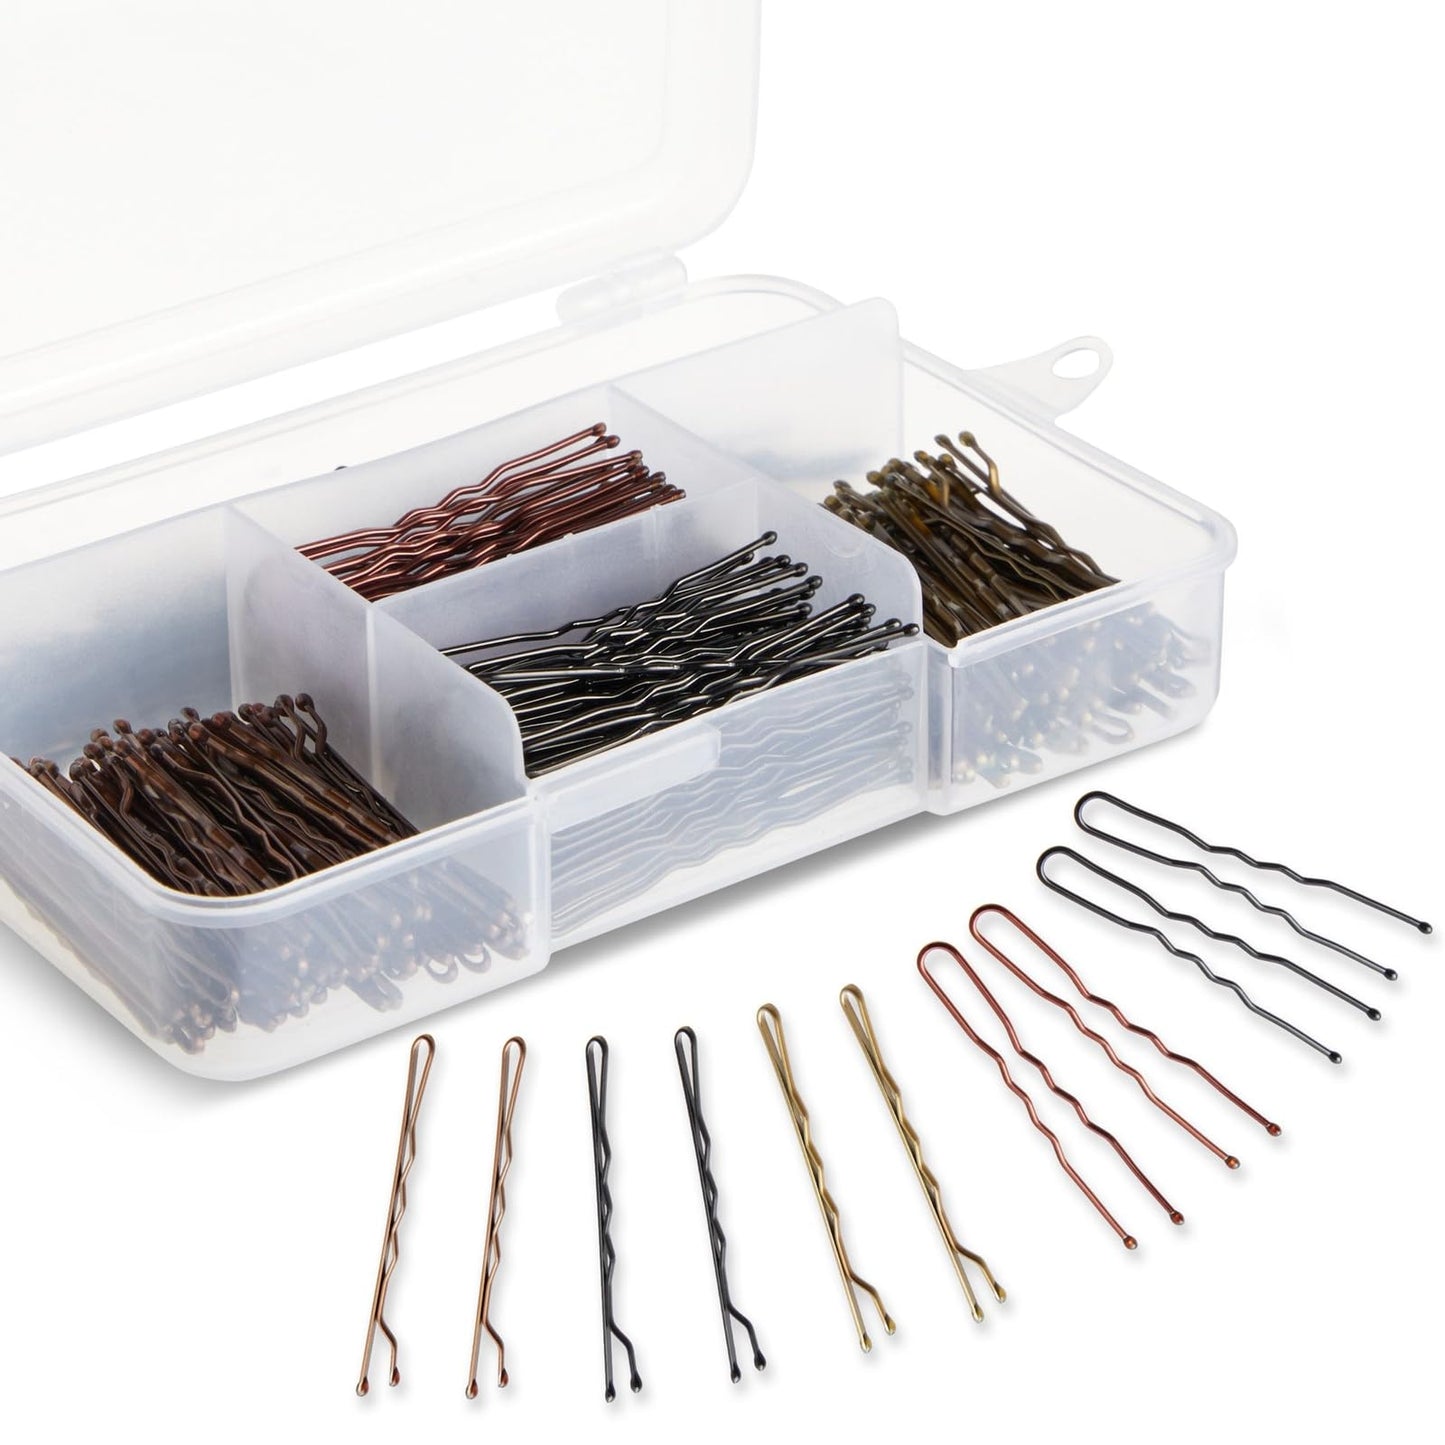 Okuna Outpost 360 Pack 2 Inch Hair Pins with Clear Holder, Bulk Set of Bobby Pins in 2 Styles and 4 Colors